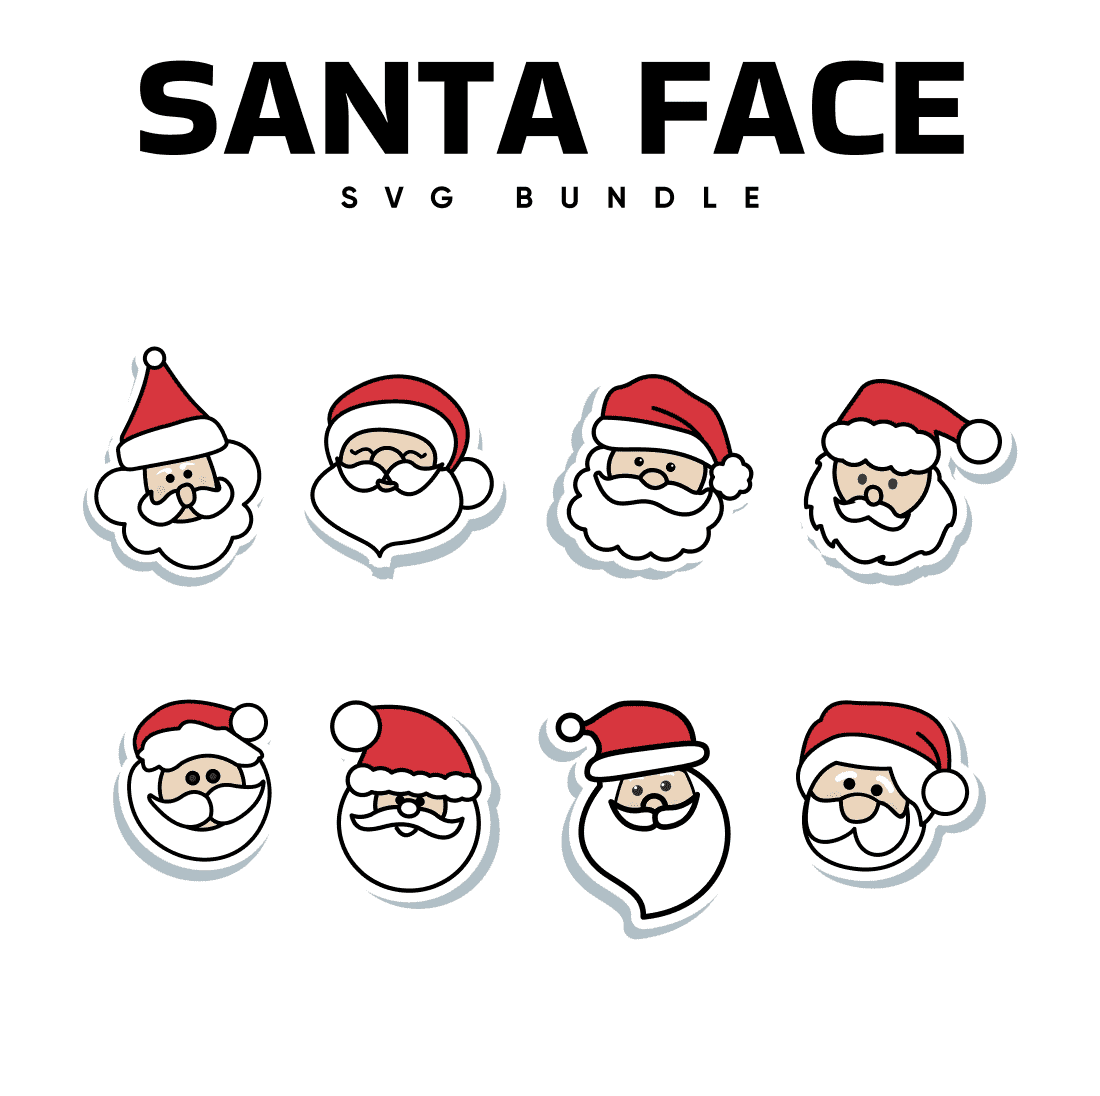 SVG Santa face with red hats.